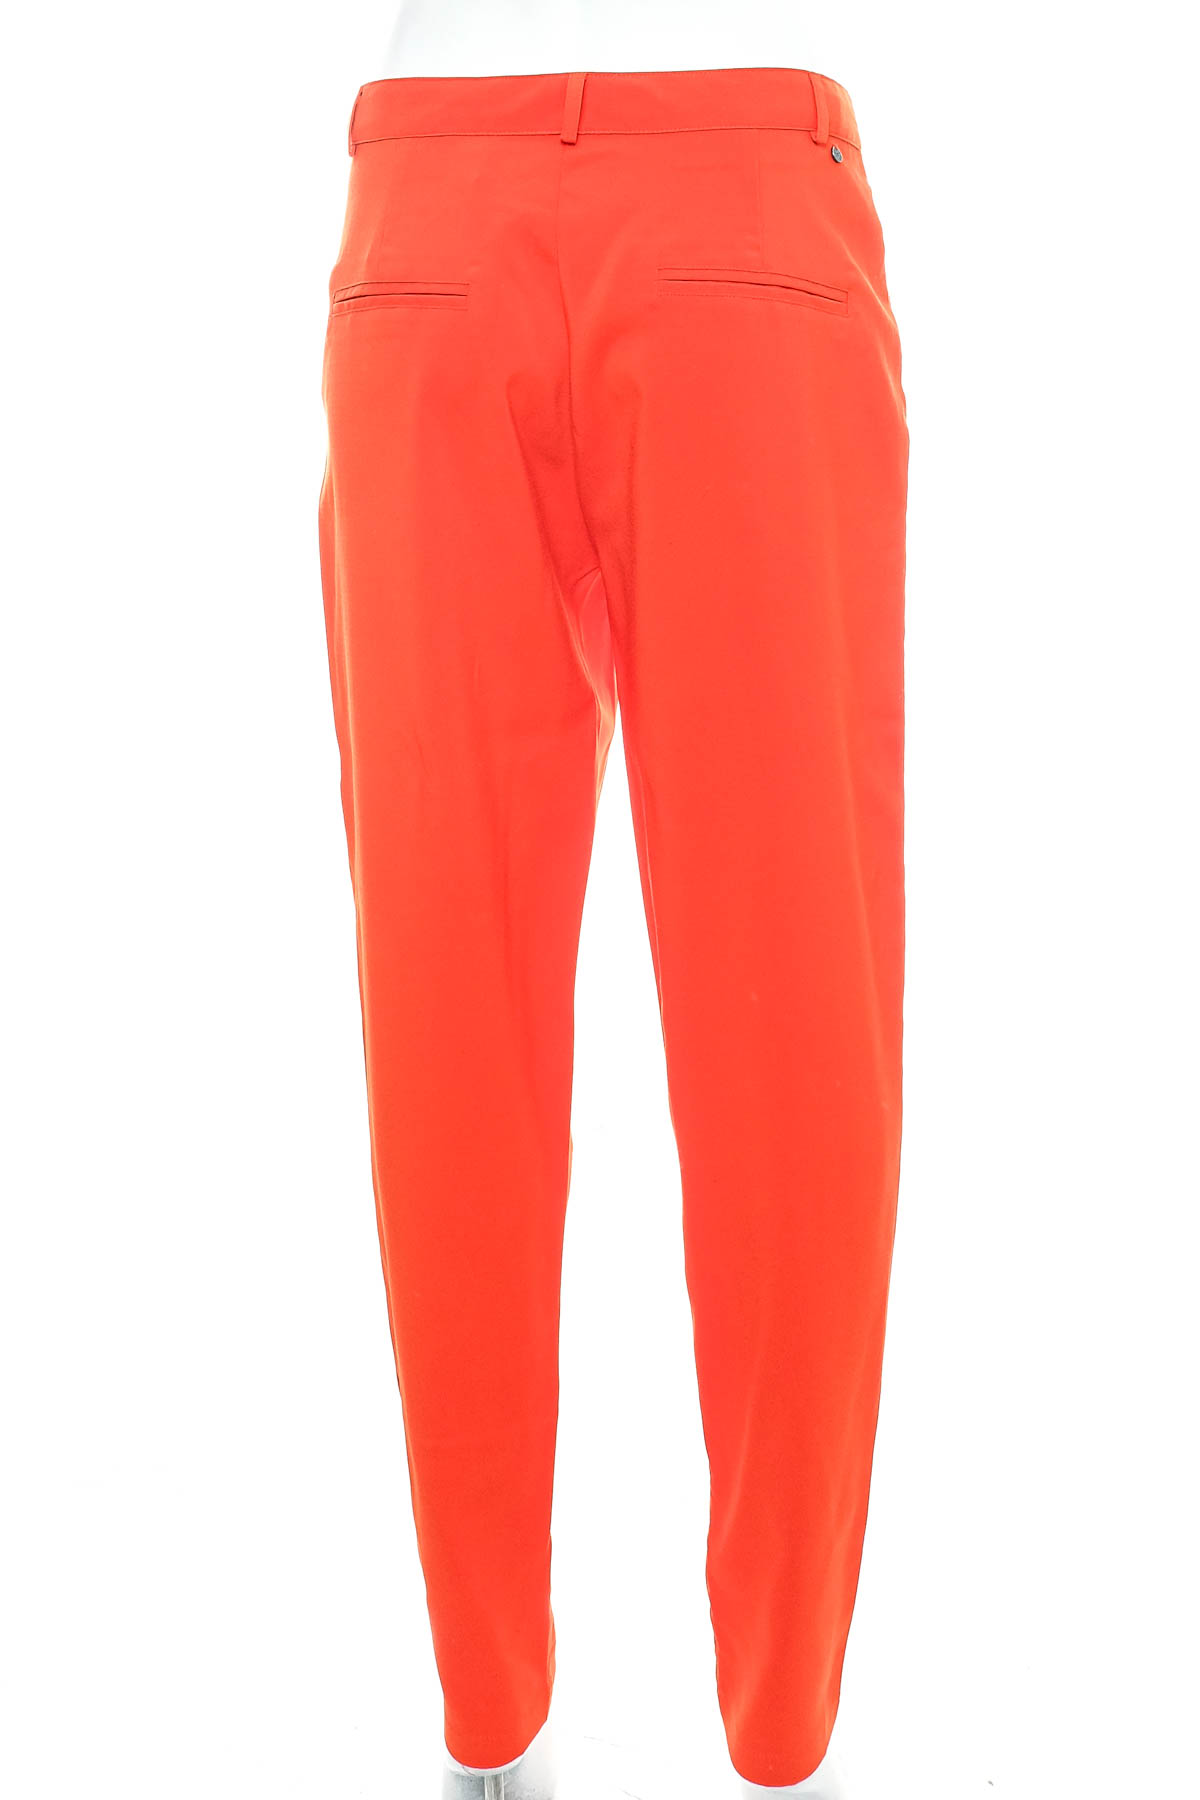 Women's trousers - Trend BY CAPTAIN TORTUE - 1